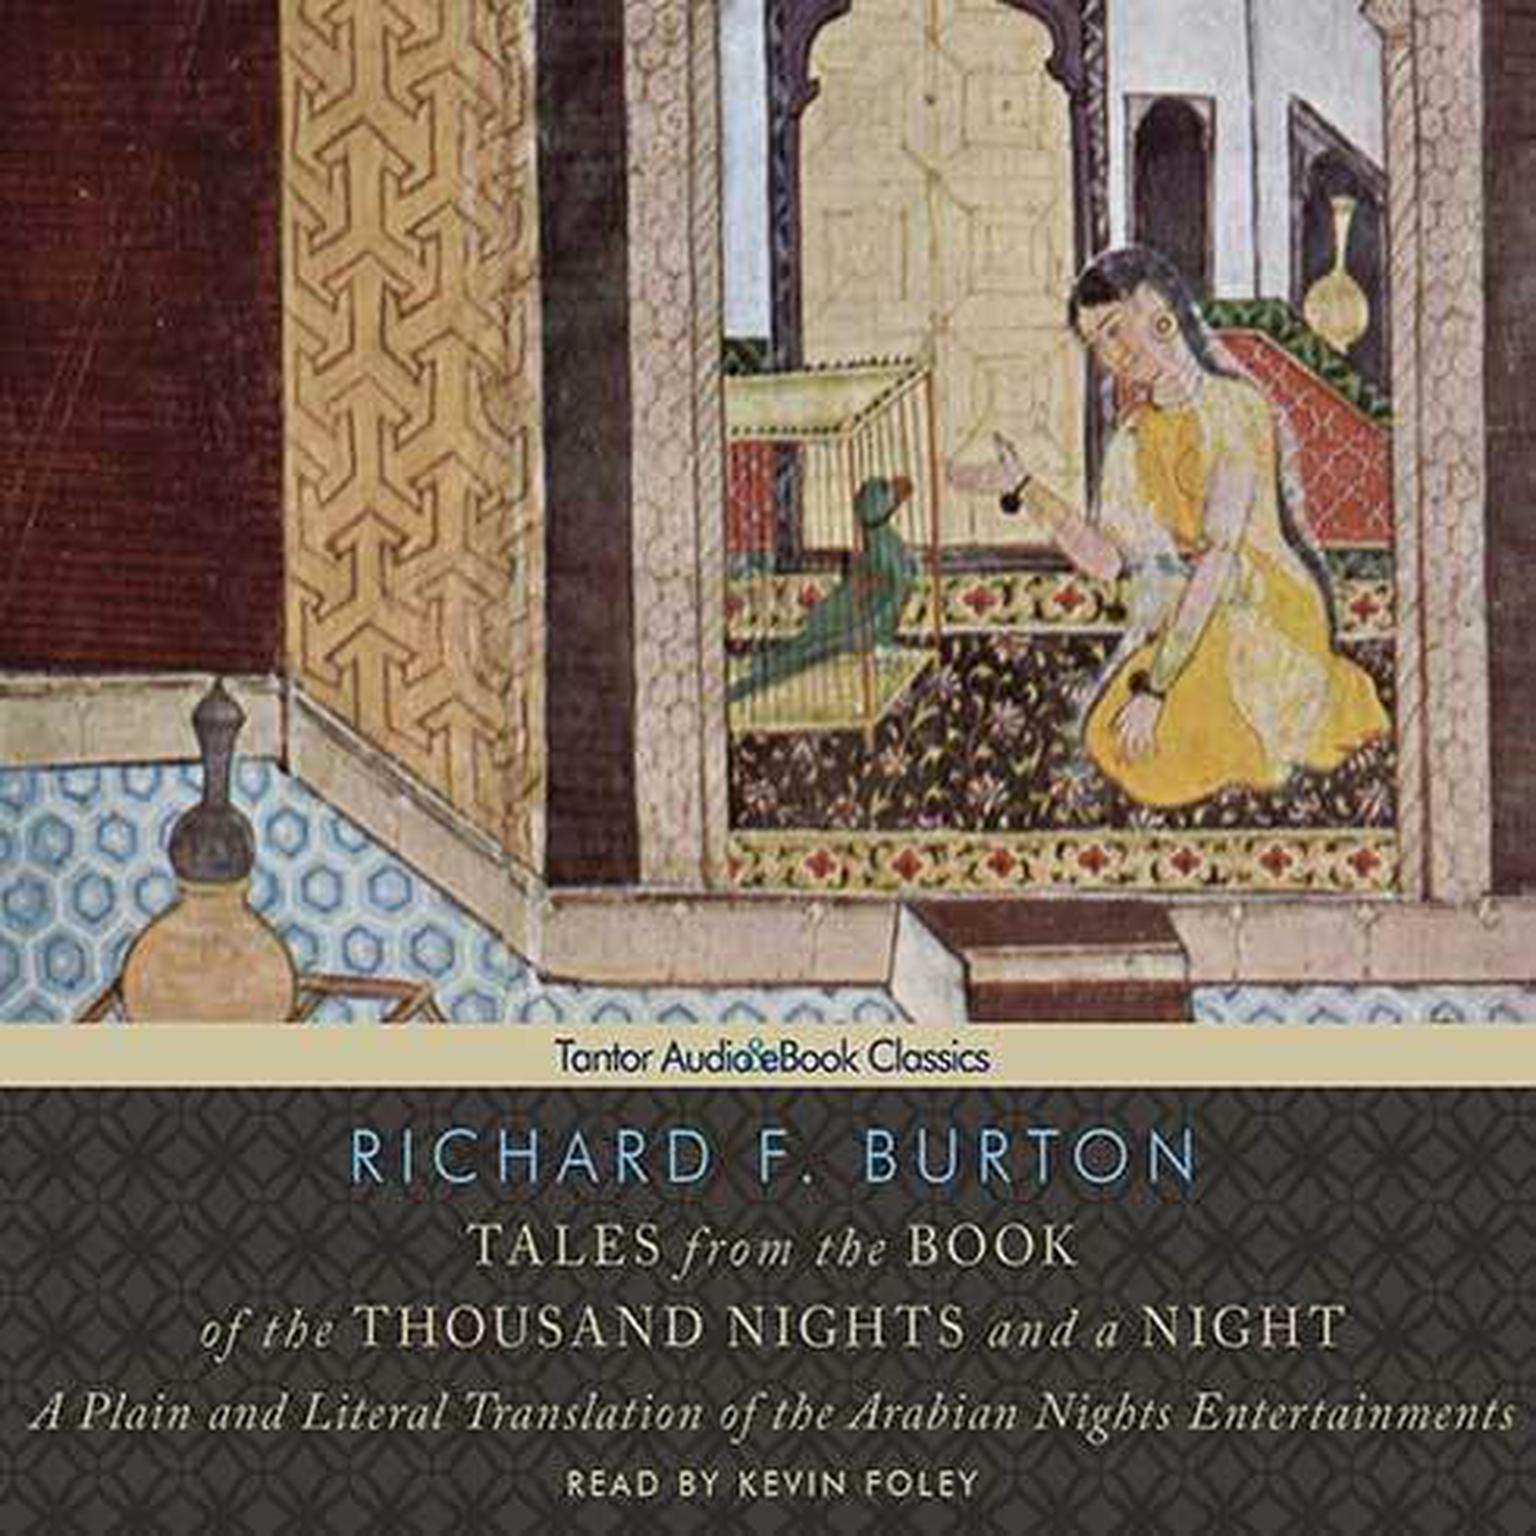 Tales from the Book of the Thousand Nights and a Night: A Plain and Literal Translation of the Arabian Nights Entertainments Audiobook, by Richard F. Burton